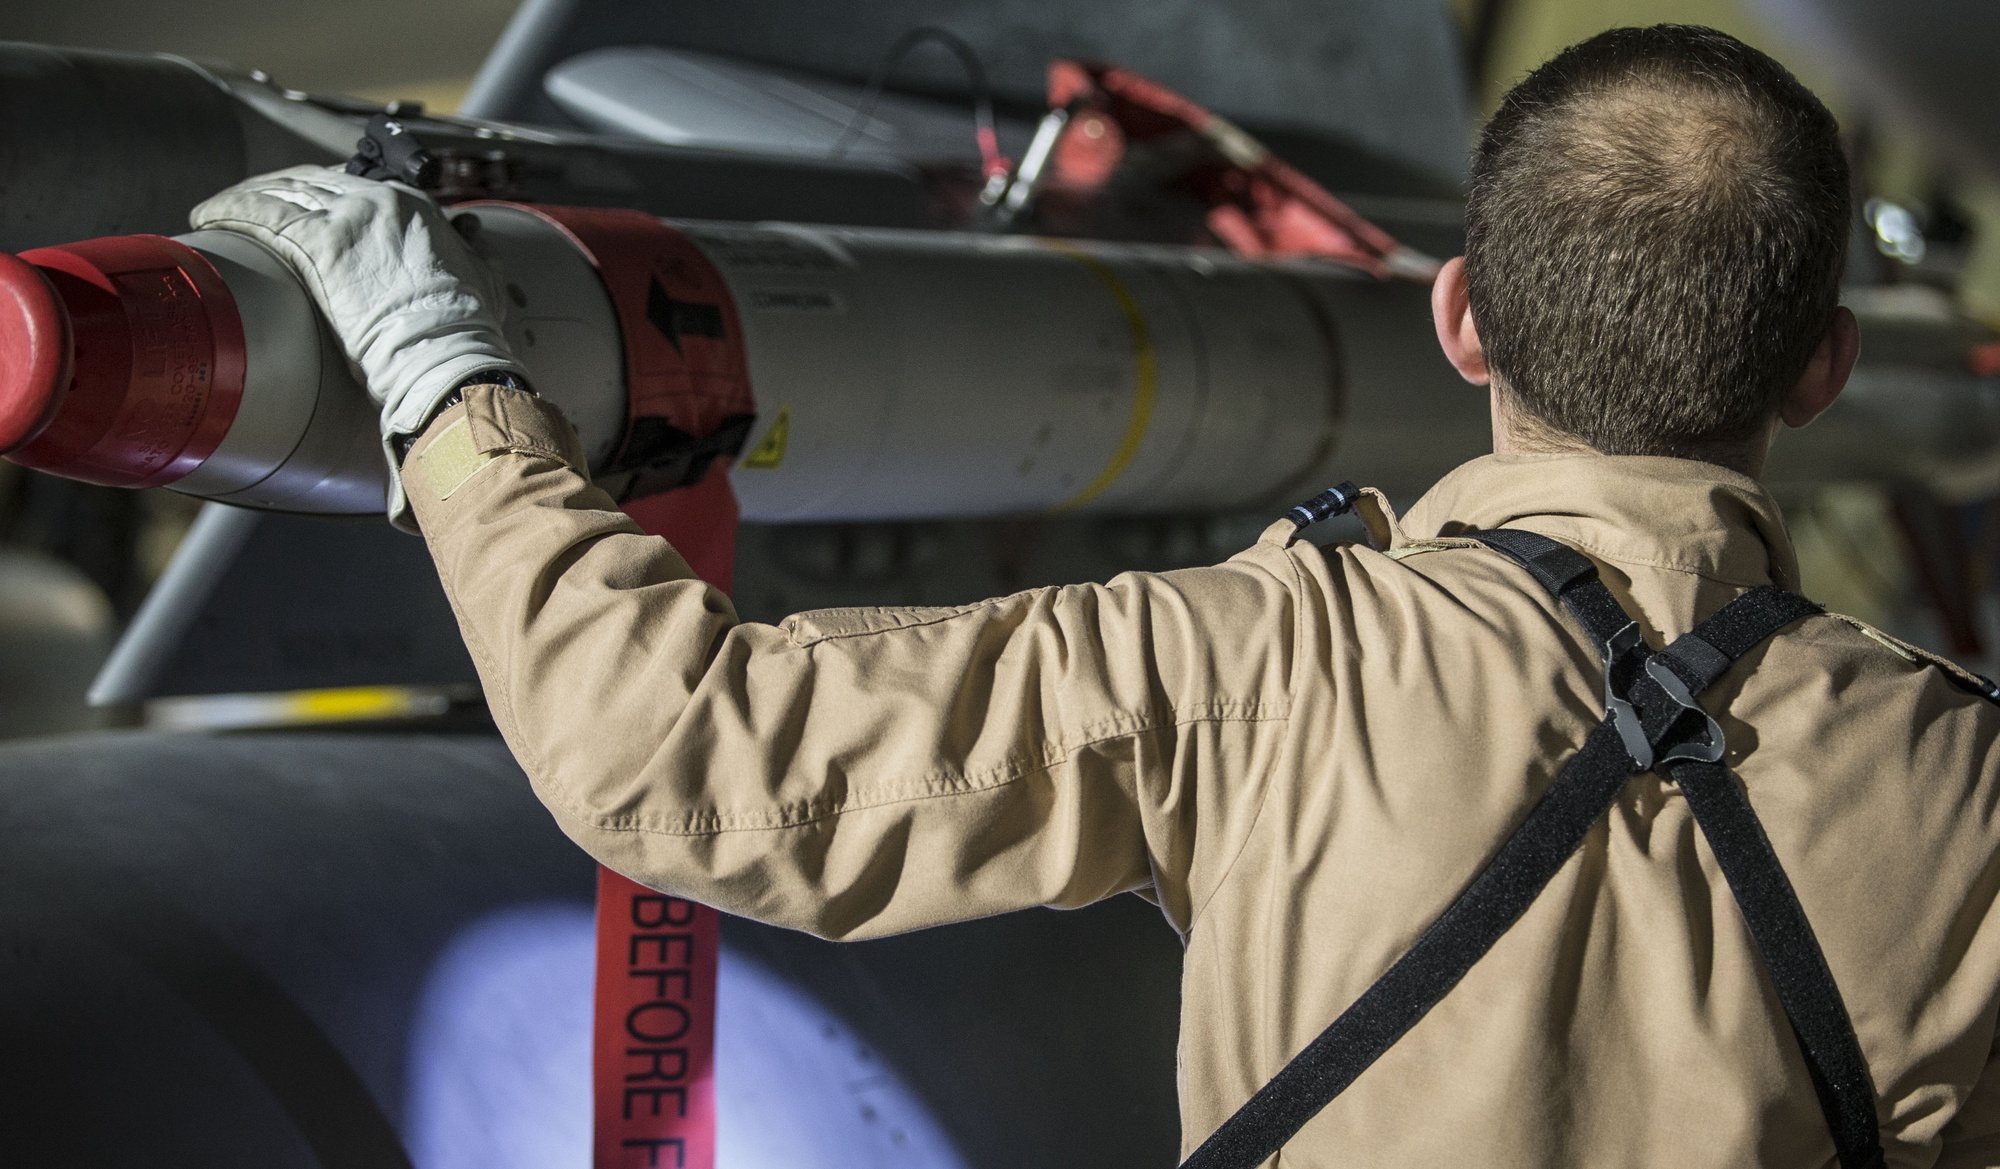 epa06667948 A handout photo made available by the British Ministry of Defence (MoD) showing a British Royal Air Force (RAF) Tornado pilot checking the weapons on his Tornado aircfraft at RAF Akrotiri, Cyprus, 14 April 2018.The MoD report that four RAF Tornado&#039;s took off on 14 April 2018 from RAF Akrotiri to conduct precision strikes on Syrian installations involved in the use of chemical weapons. The Tornados, flown by 31 Squadron the Goldstars, were supported by a Voyager aircraft. They launched Storm Shadow missiles at a military facility â€“ a former missile base â€“ some fifteen miles west of Homs, where the regime is assessed to keep chemical weapon precursors stockpiled in breach of Syriaâ€™s obligations under the Chemical Weapons Convention.  Very careful scientific analysis was applied to determine where best to target the Storm Shadows to maximise the destruction of the stockpiled chemicals and to minimise any risks of contamination to the surrounding area.  The facility which was struck is located some distance from any known concentrations of civilian habitation, reducing yet further any such risk.  EPA/Cpl L MATTHEWS / BRITISH MINISTRY OF DEFENCE / HANDOUT MANDATORY CREDIT MOD: CROWN COPYRIGHT HANDOUT EDITORIAL USE ONLY/NO SALES